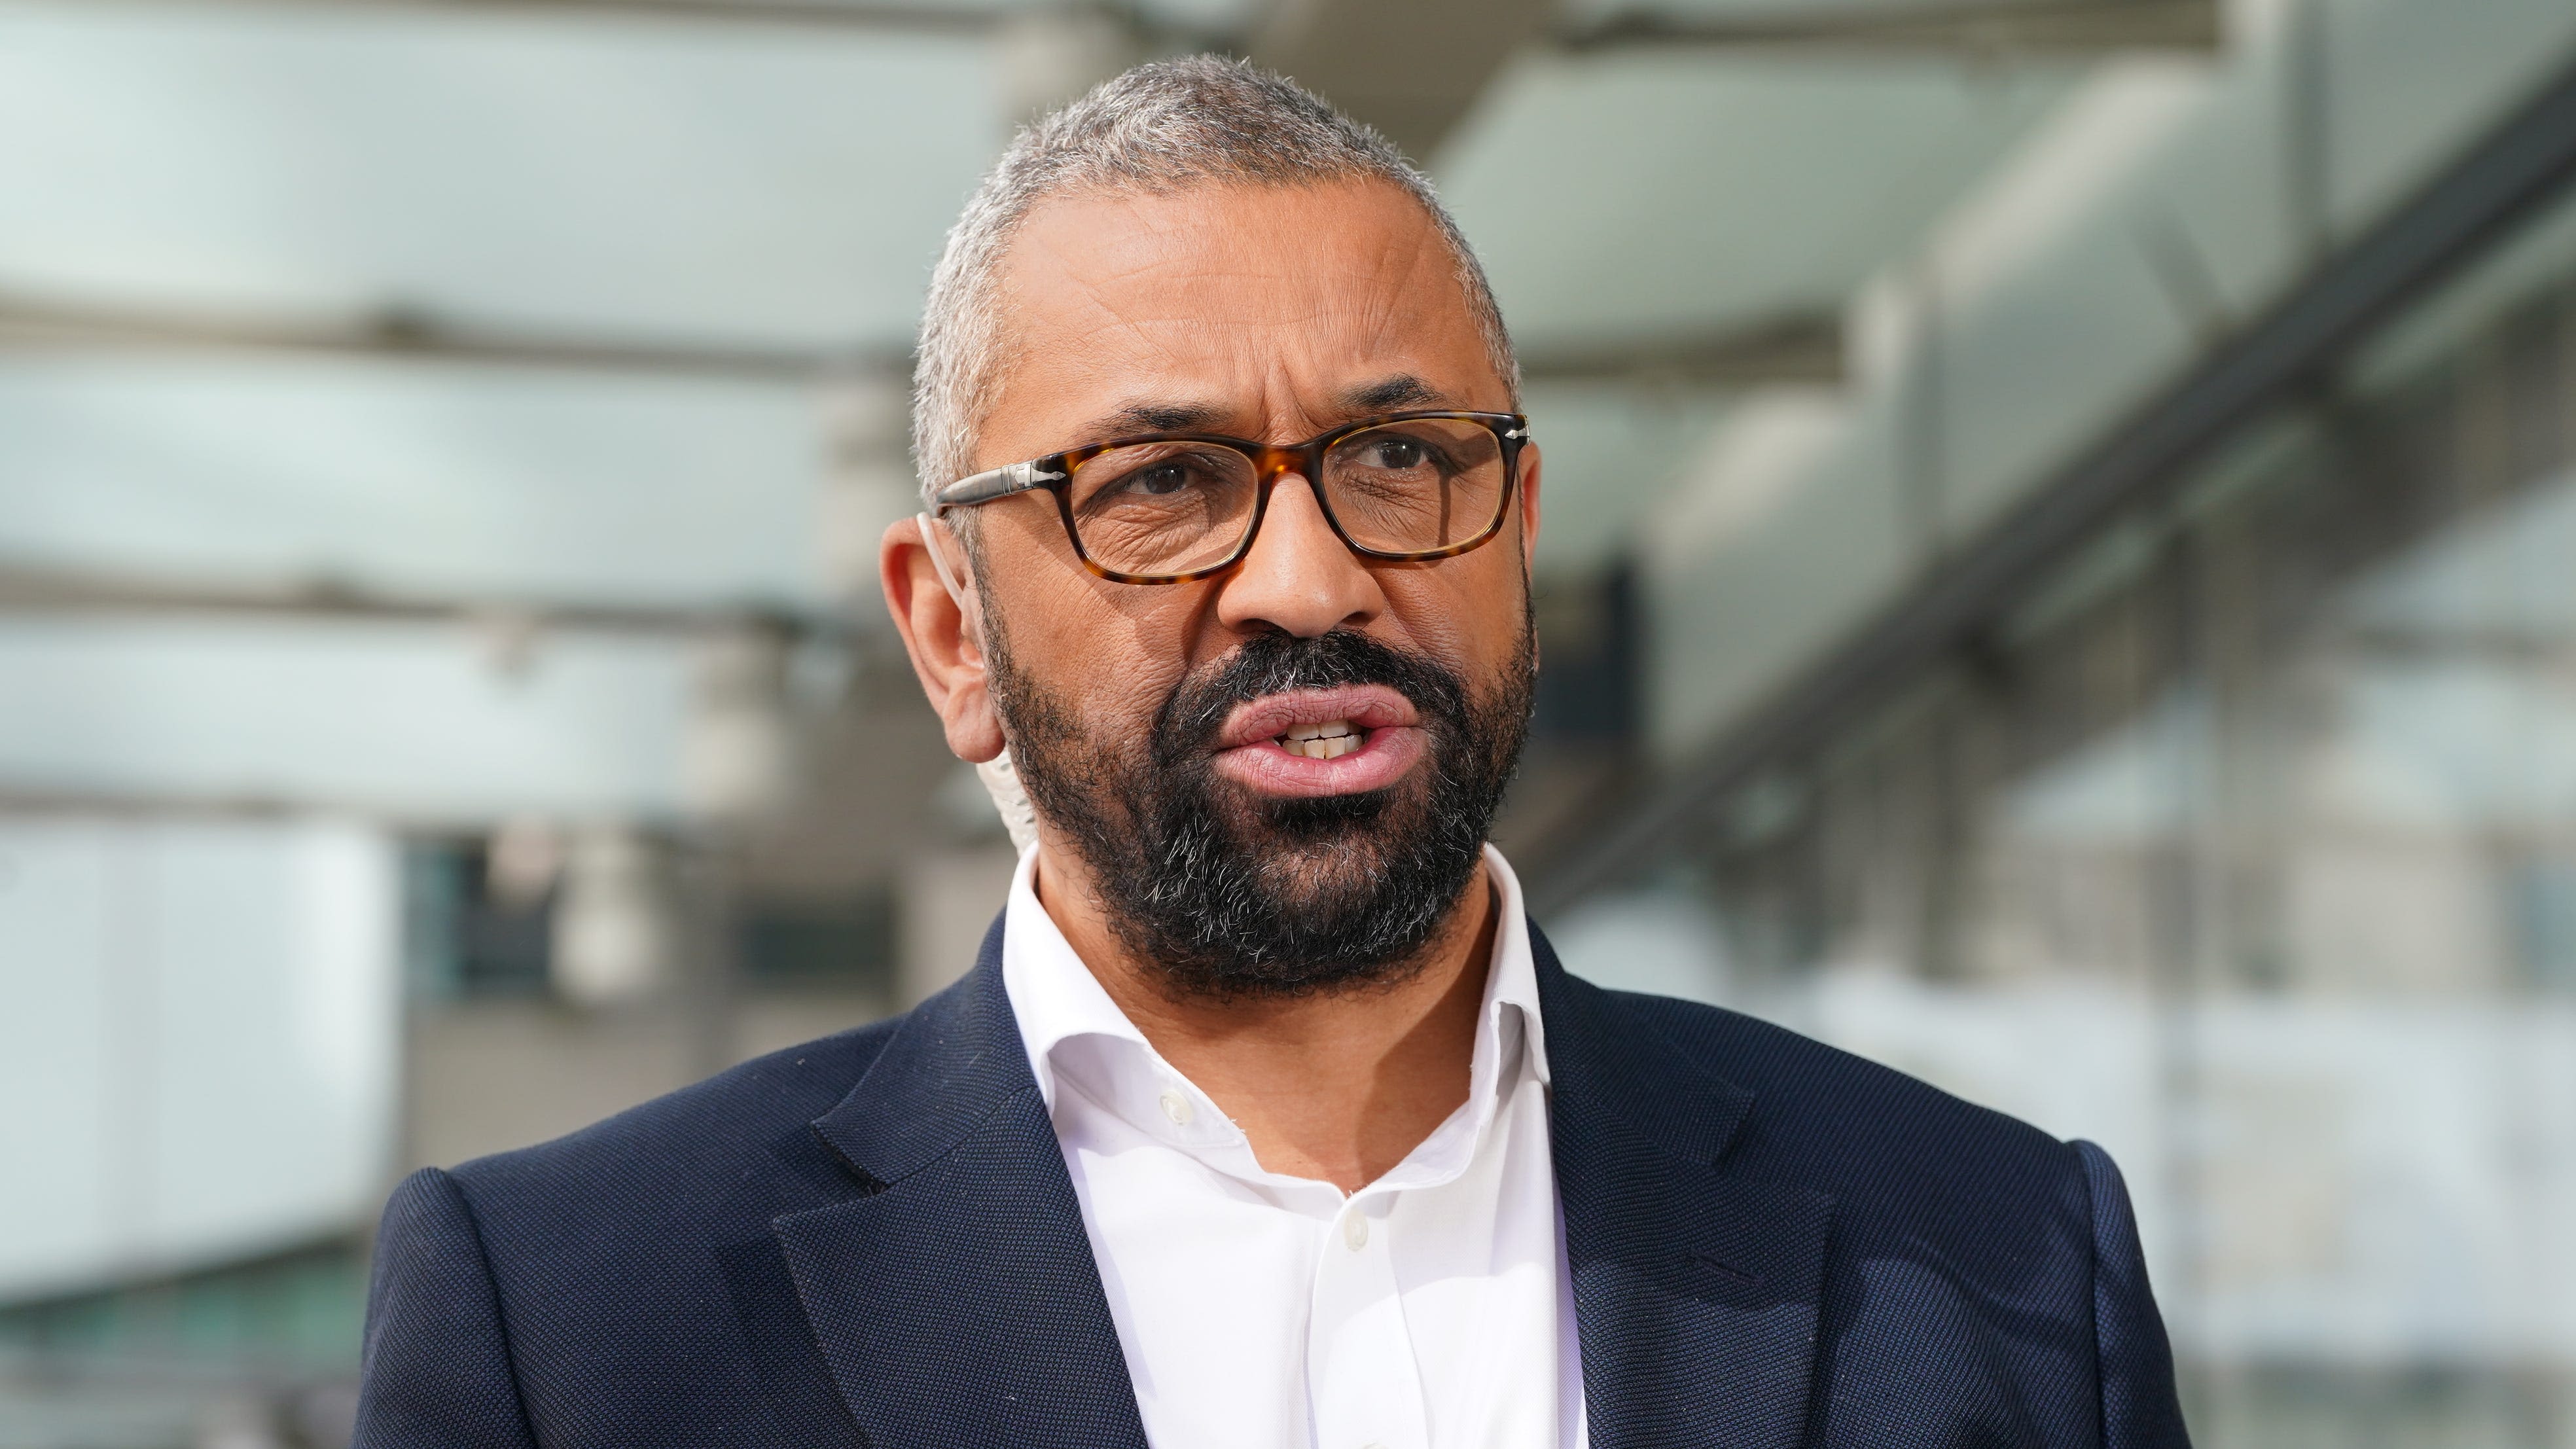 Yvette Cooper accused by James Cleverly of not taking knife crime seriously